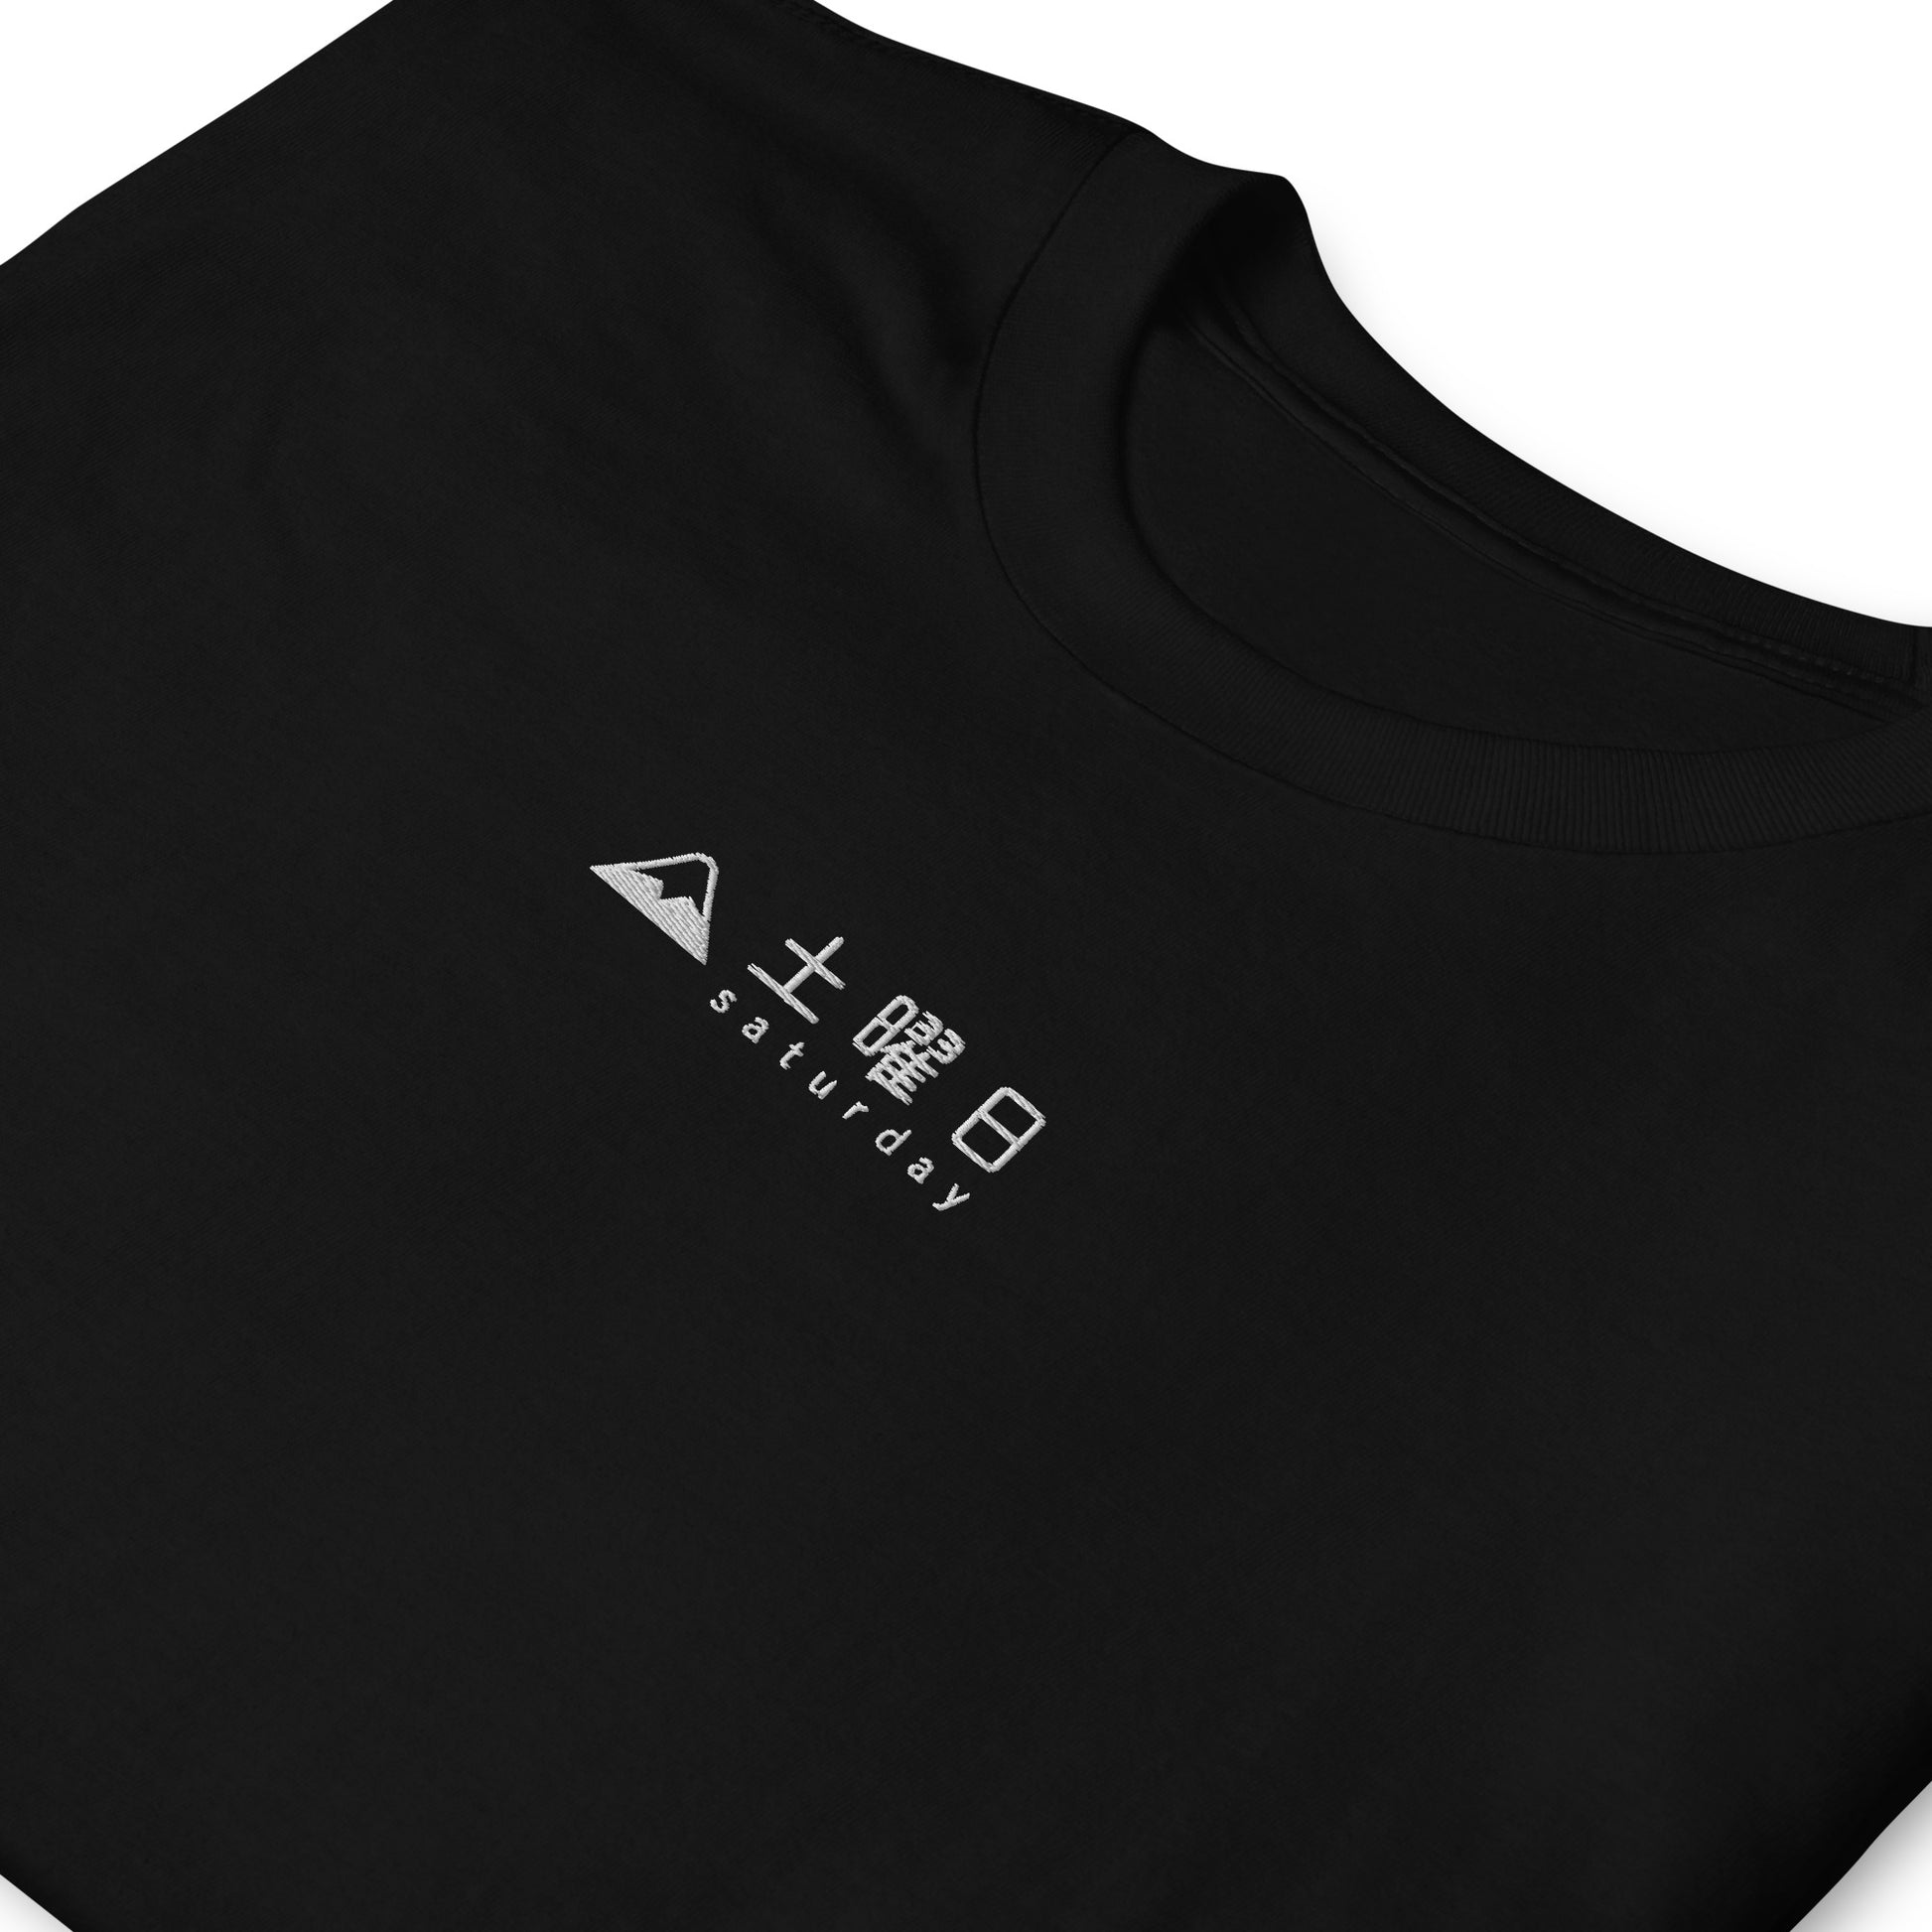 Black High Quality Tee - Front Design with an Black Embroidery "Saturday" in Japanese and English